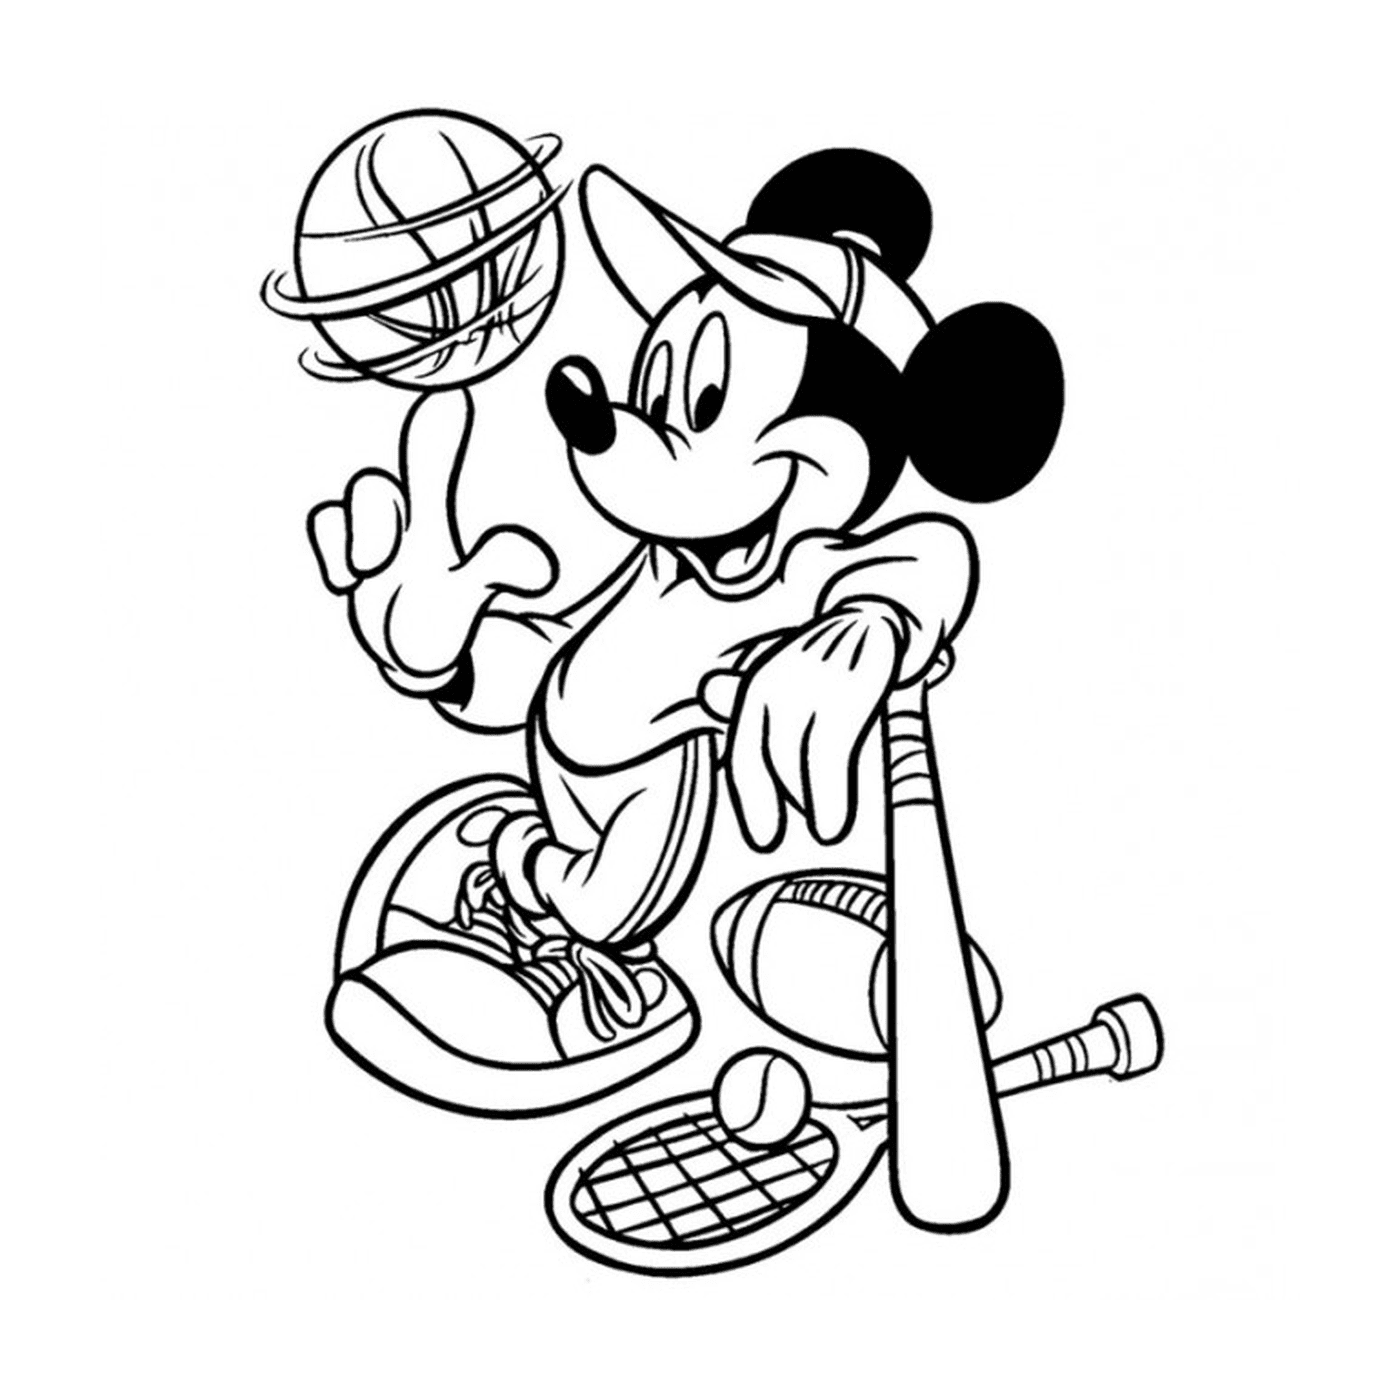  Sport, Disney, Mickey Mouse holding a baseball bat and a ball 